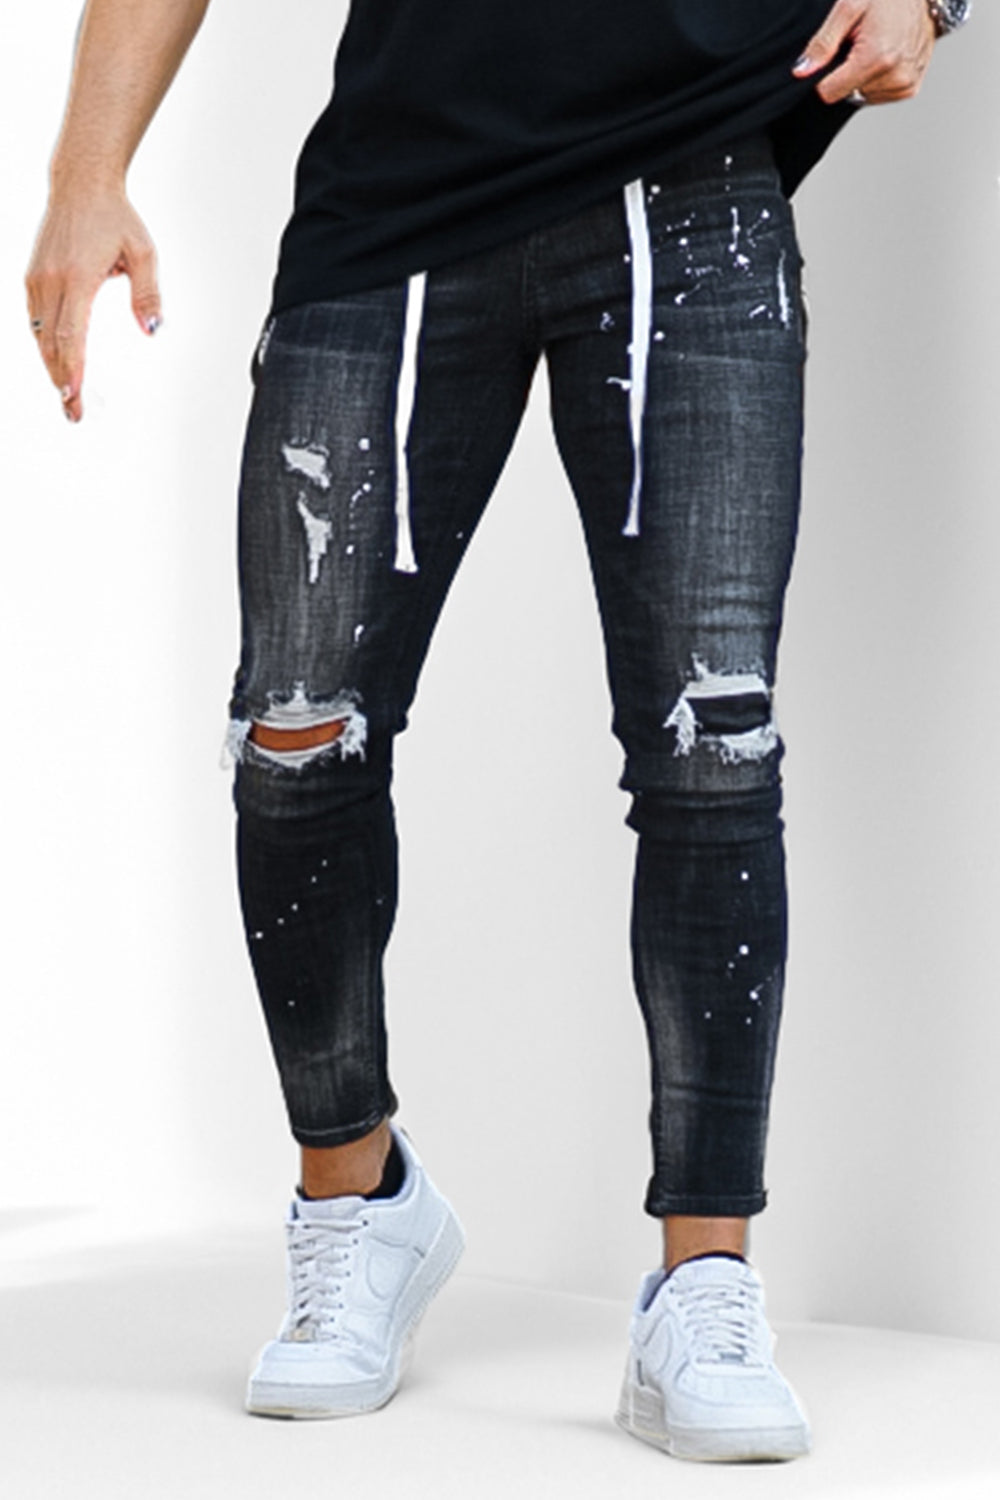 Men's Relaxed Skinny Jeans - Black & Ripped